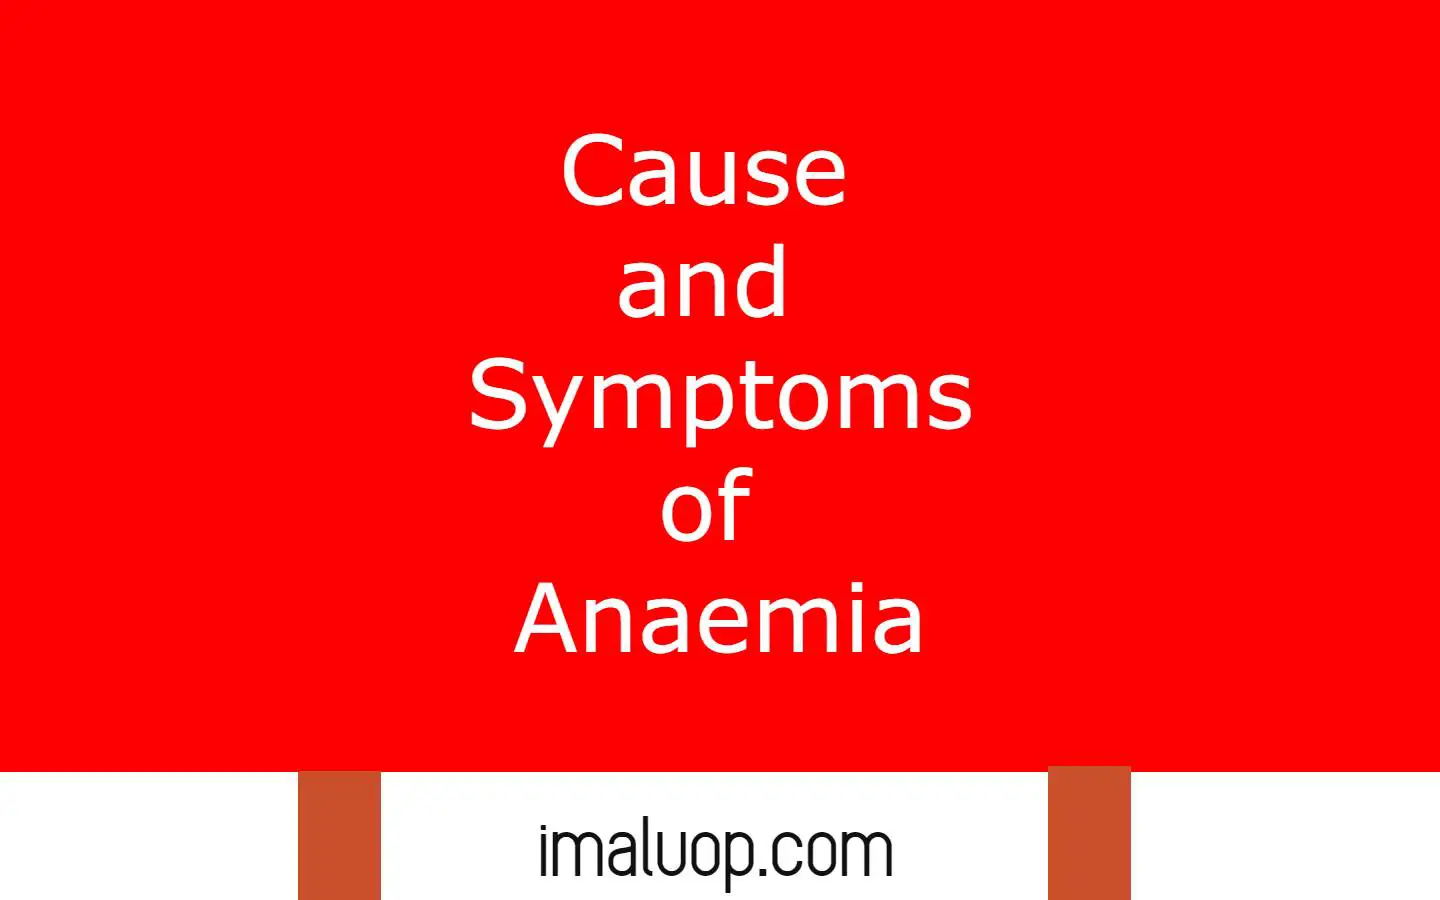 Causes and Symptoms of Anaemia